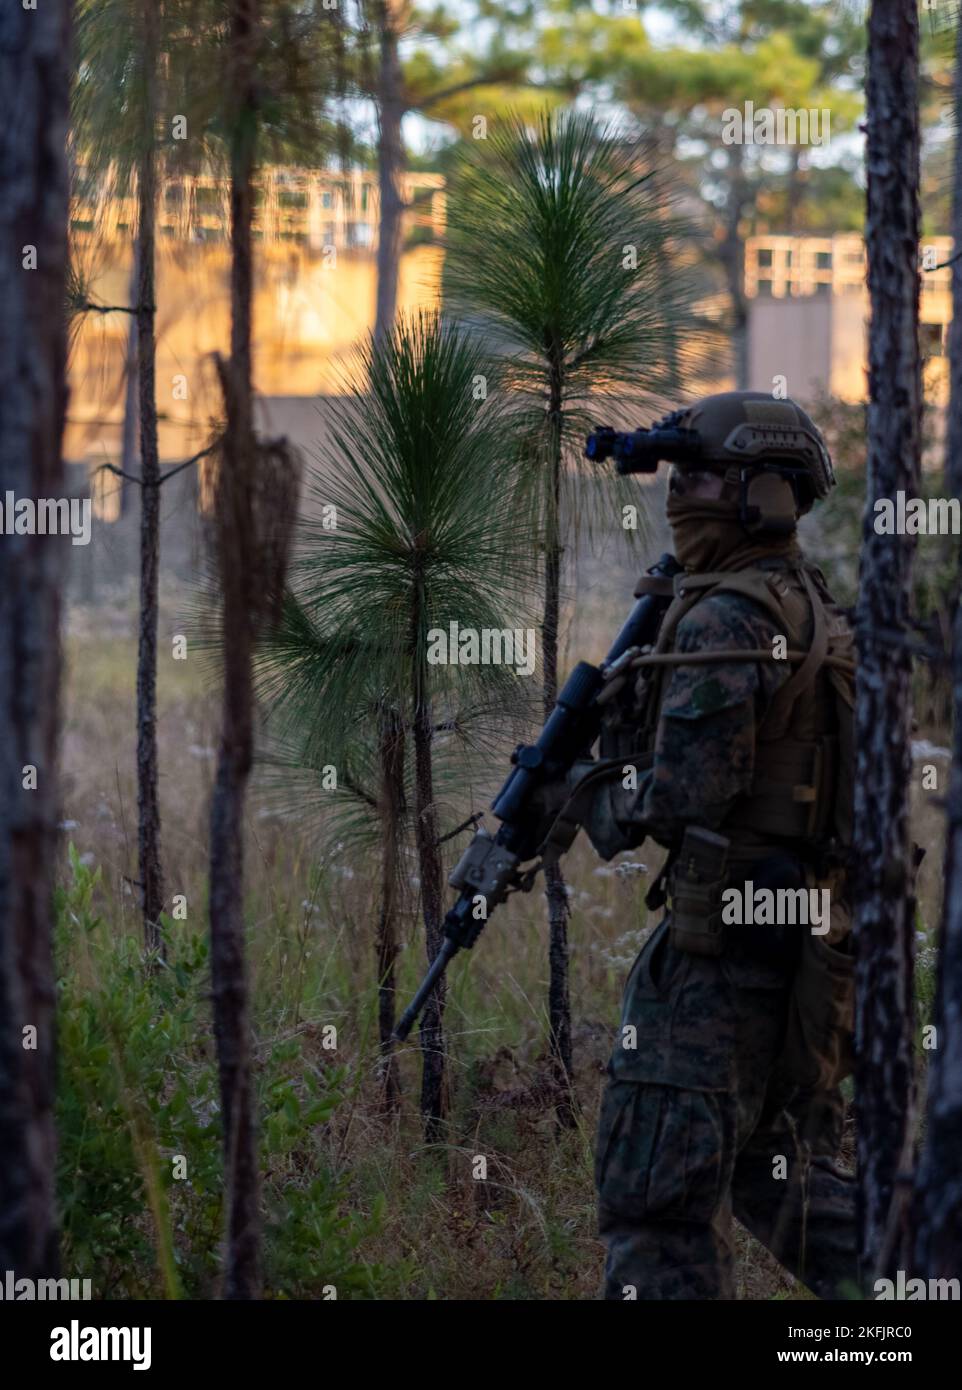 A U.S. Marine with the Maritime Special Purpose Force, 26th Marine Expeditionary Unit, begins a patrol towards an objective building during Security Element and Enabler's Course (SEEC) on Marine Corps Base Camp Lejeune, North Carolina, Nov. 7, 2022. SEEC provides advanced combat marksmanship and small unit tactical training in order to provide the Marine Air-Ground Task Force with an element capable of supporting and reinforcing the reconnaissance detachment assault element while deployed. (U.S. Marine Corps photo by Lance Cpl. Rafael Brambila-Pelayo) Stock Photo